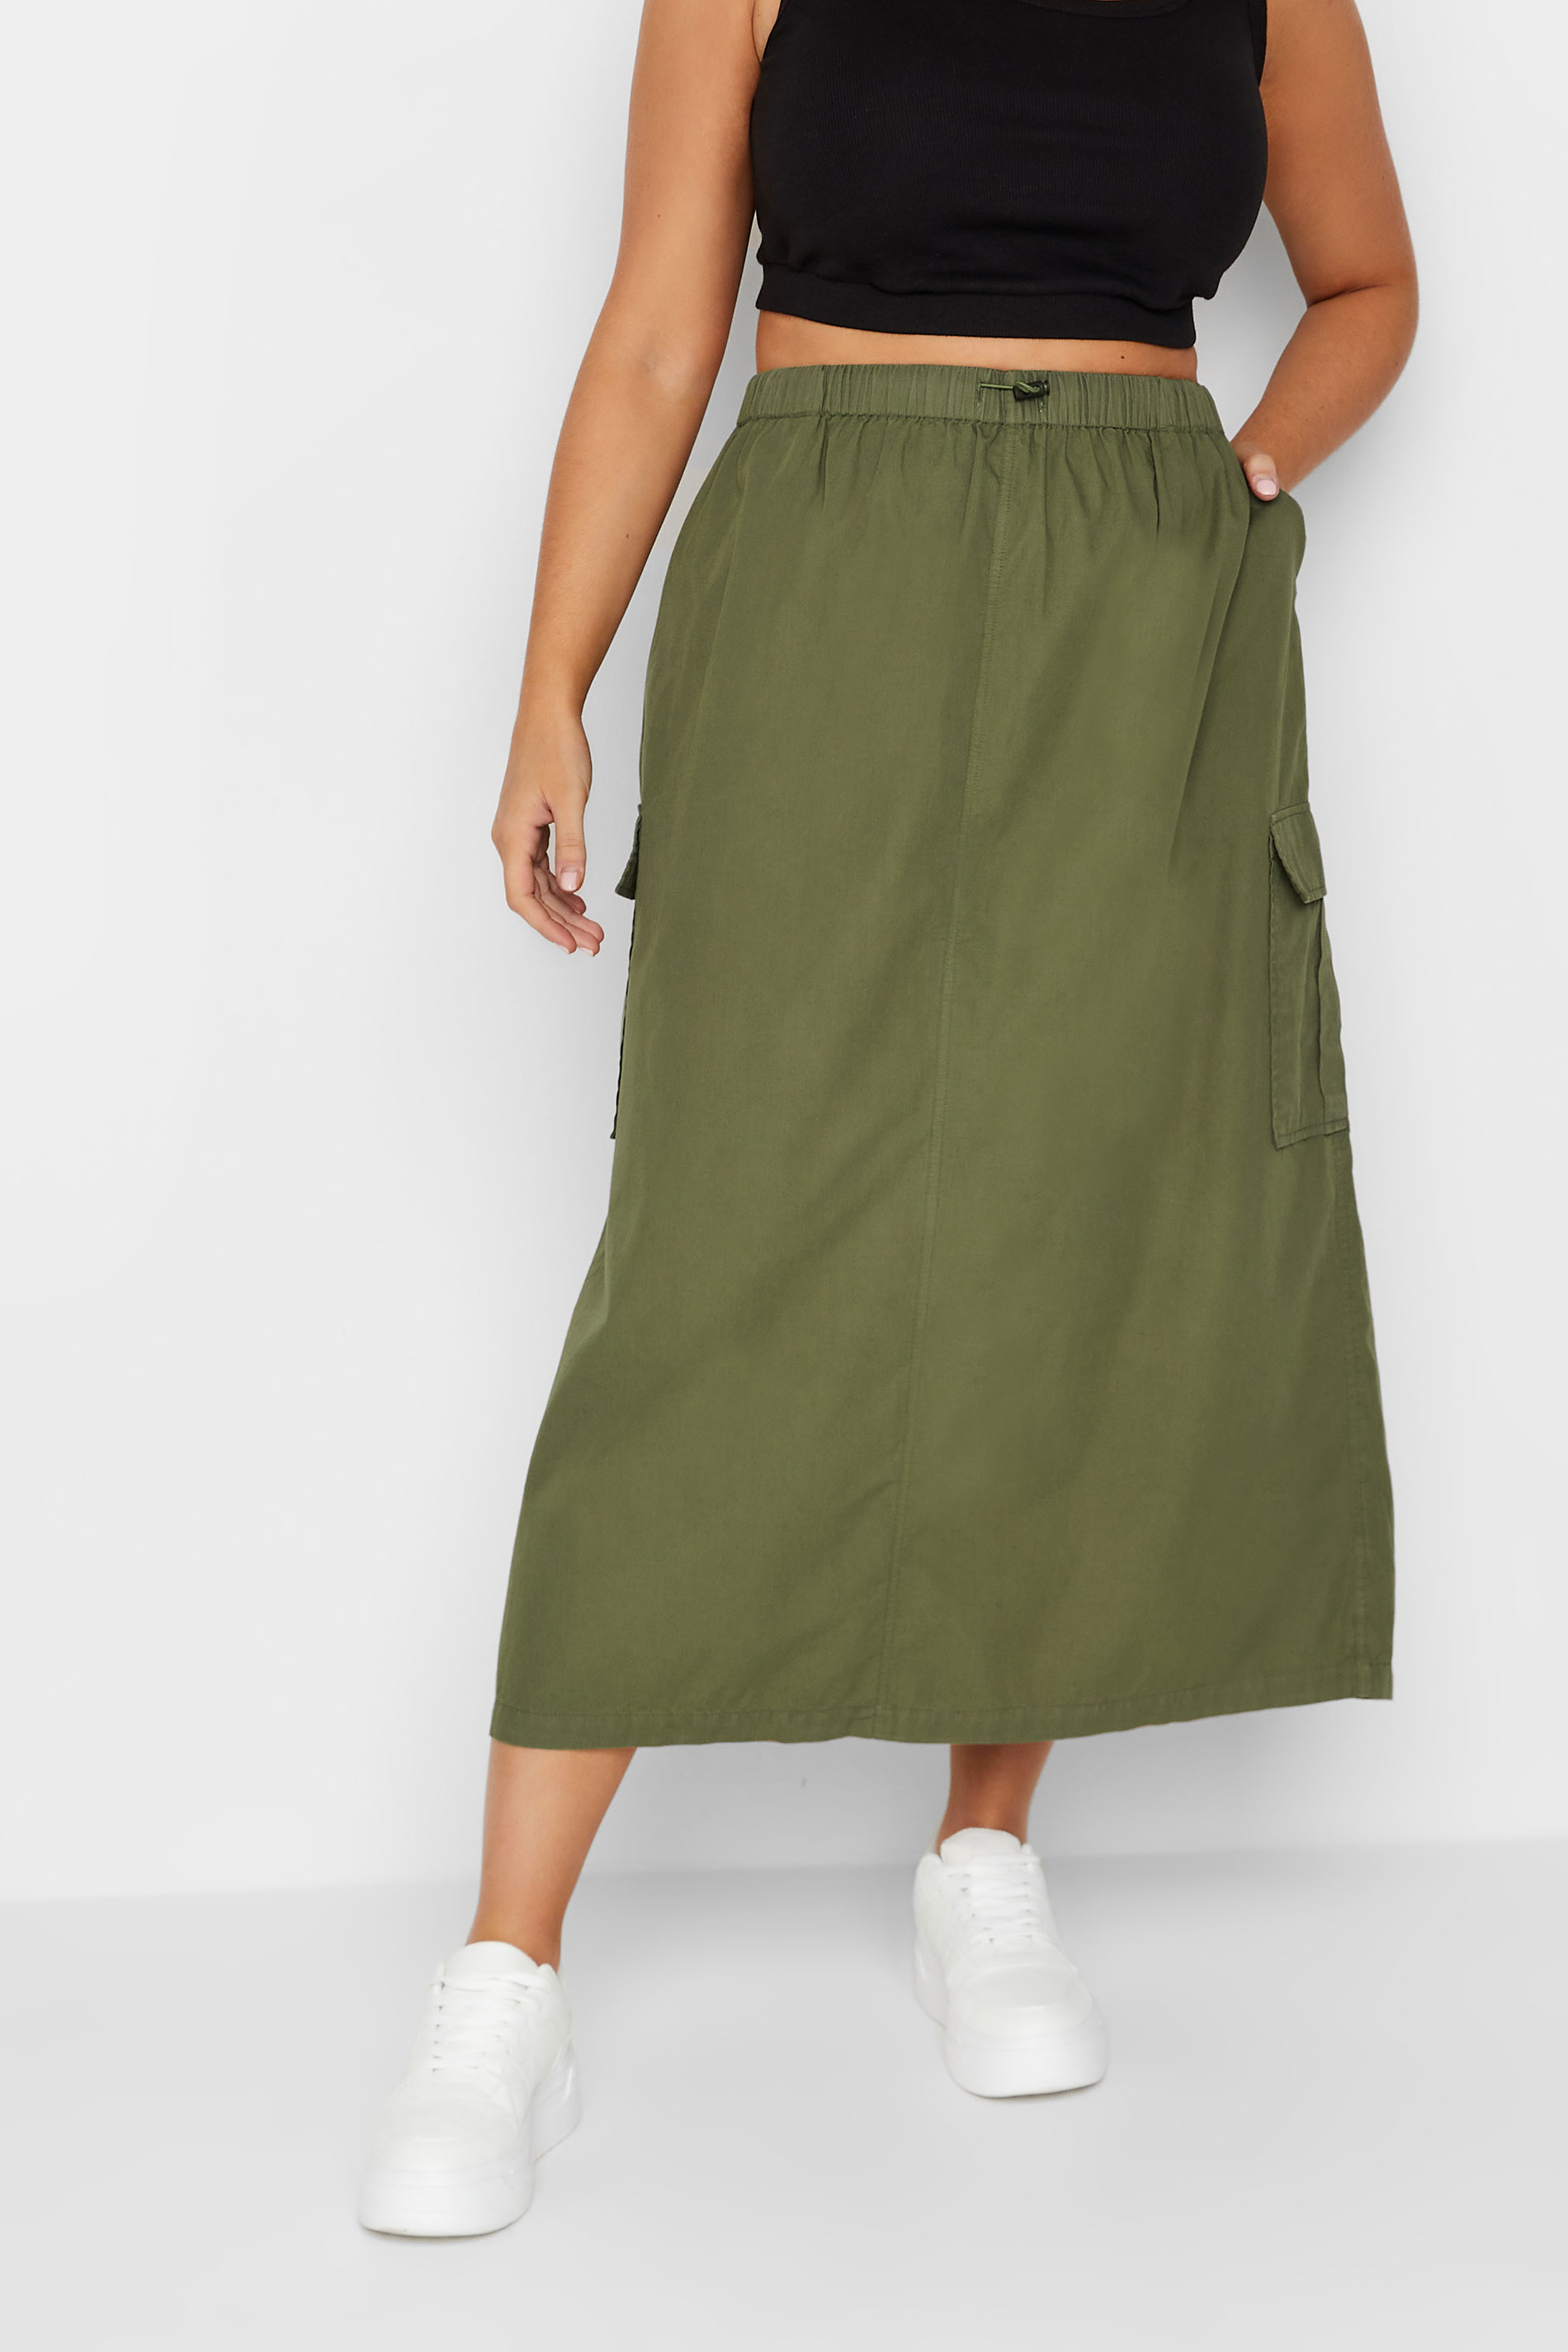 LIMITED COLLECTION Plus Size Green Parachute Skirt | Yours Clothing  1